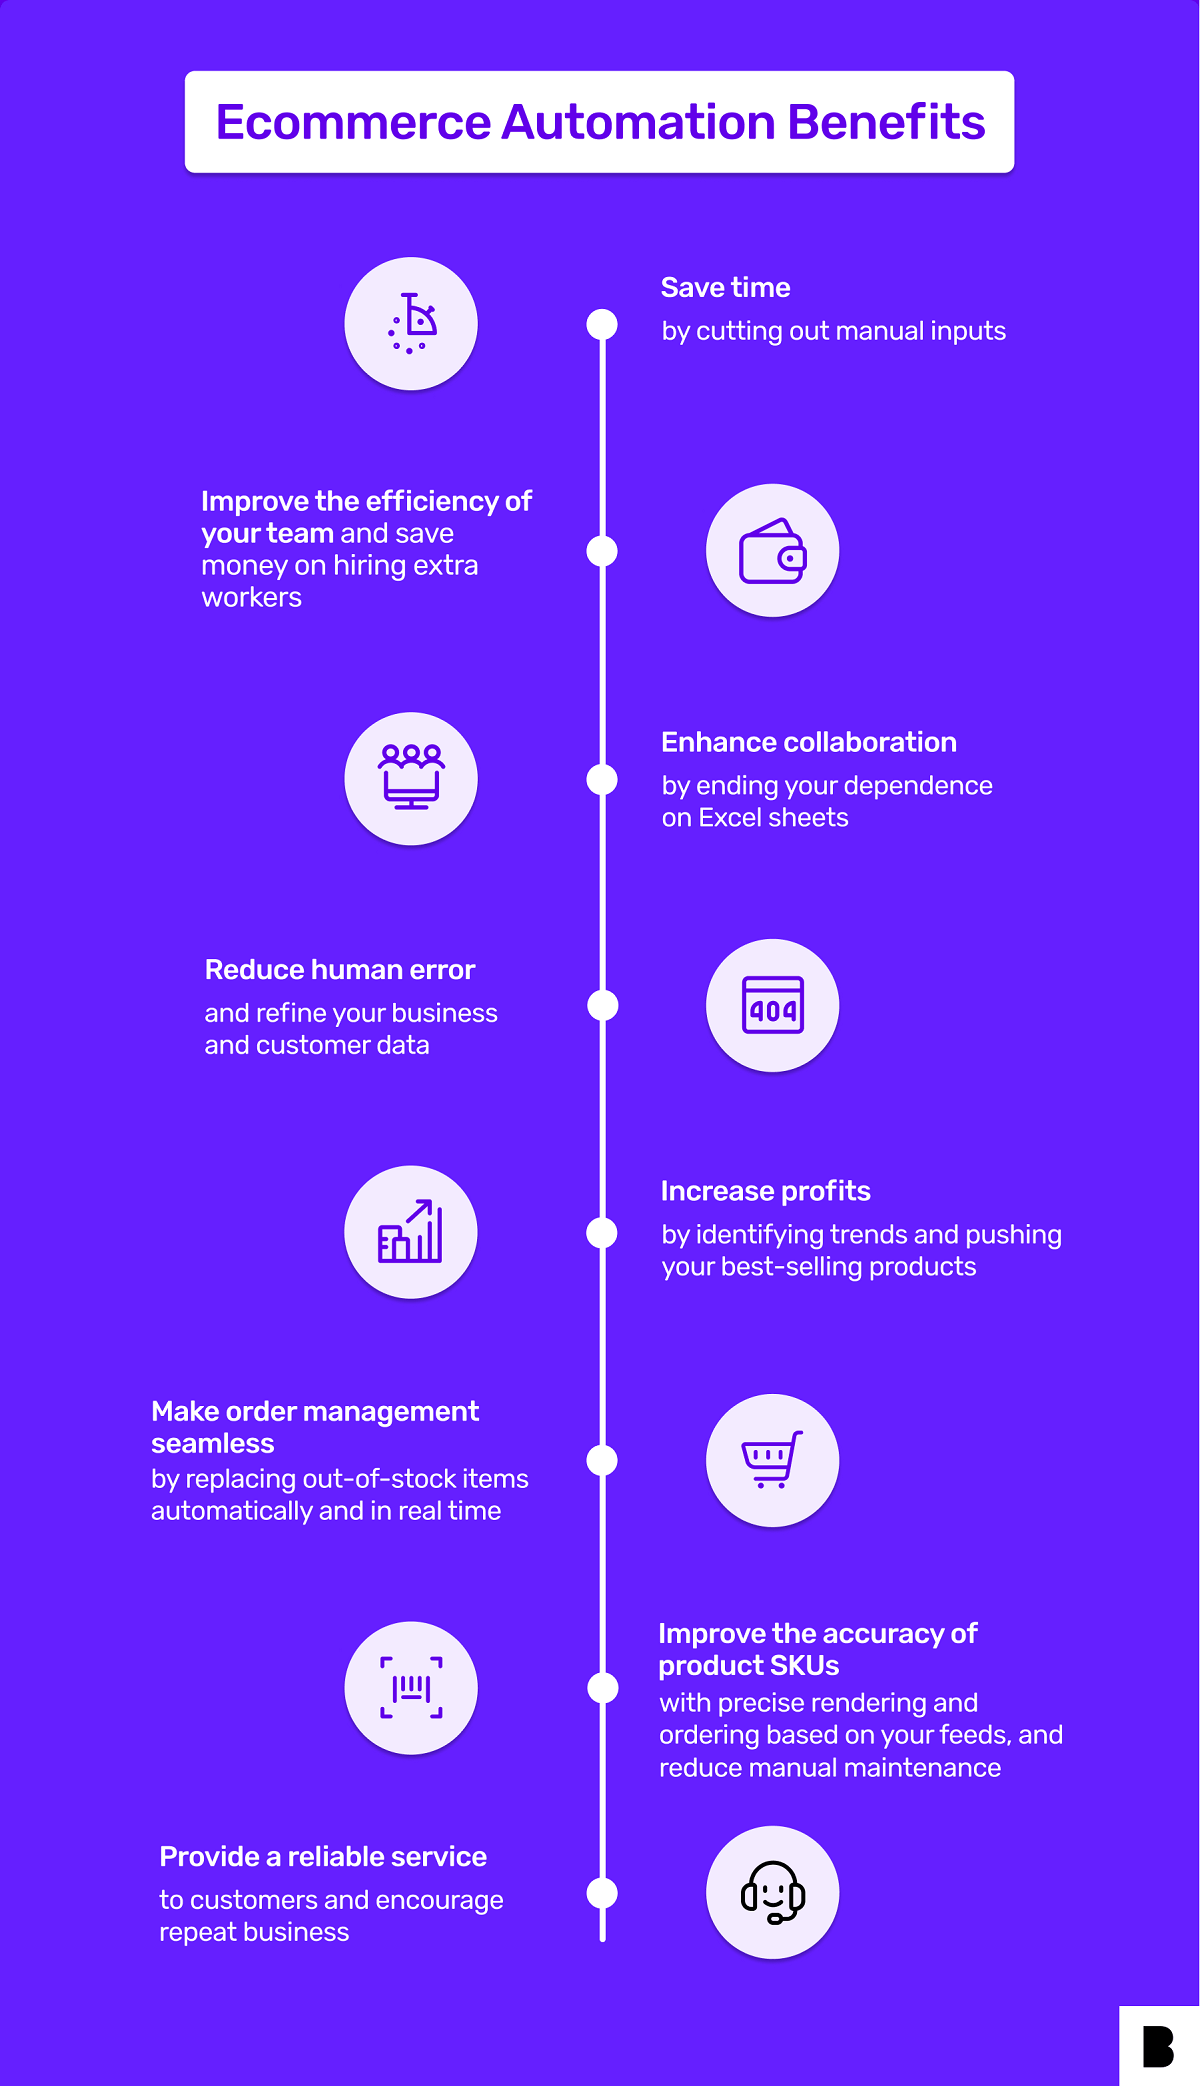 An infographic on ecommerce automation benefits